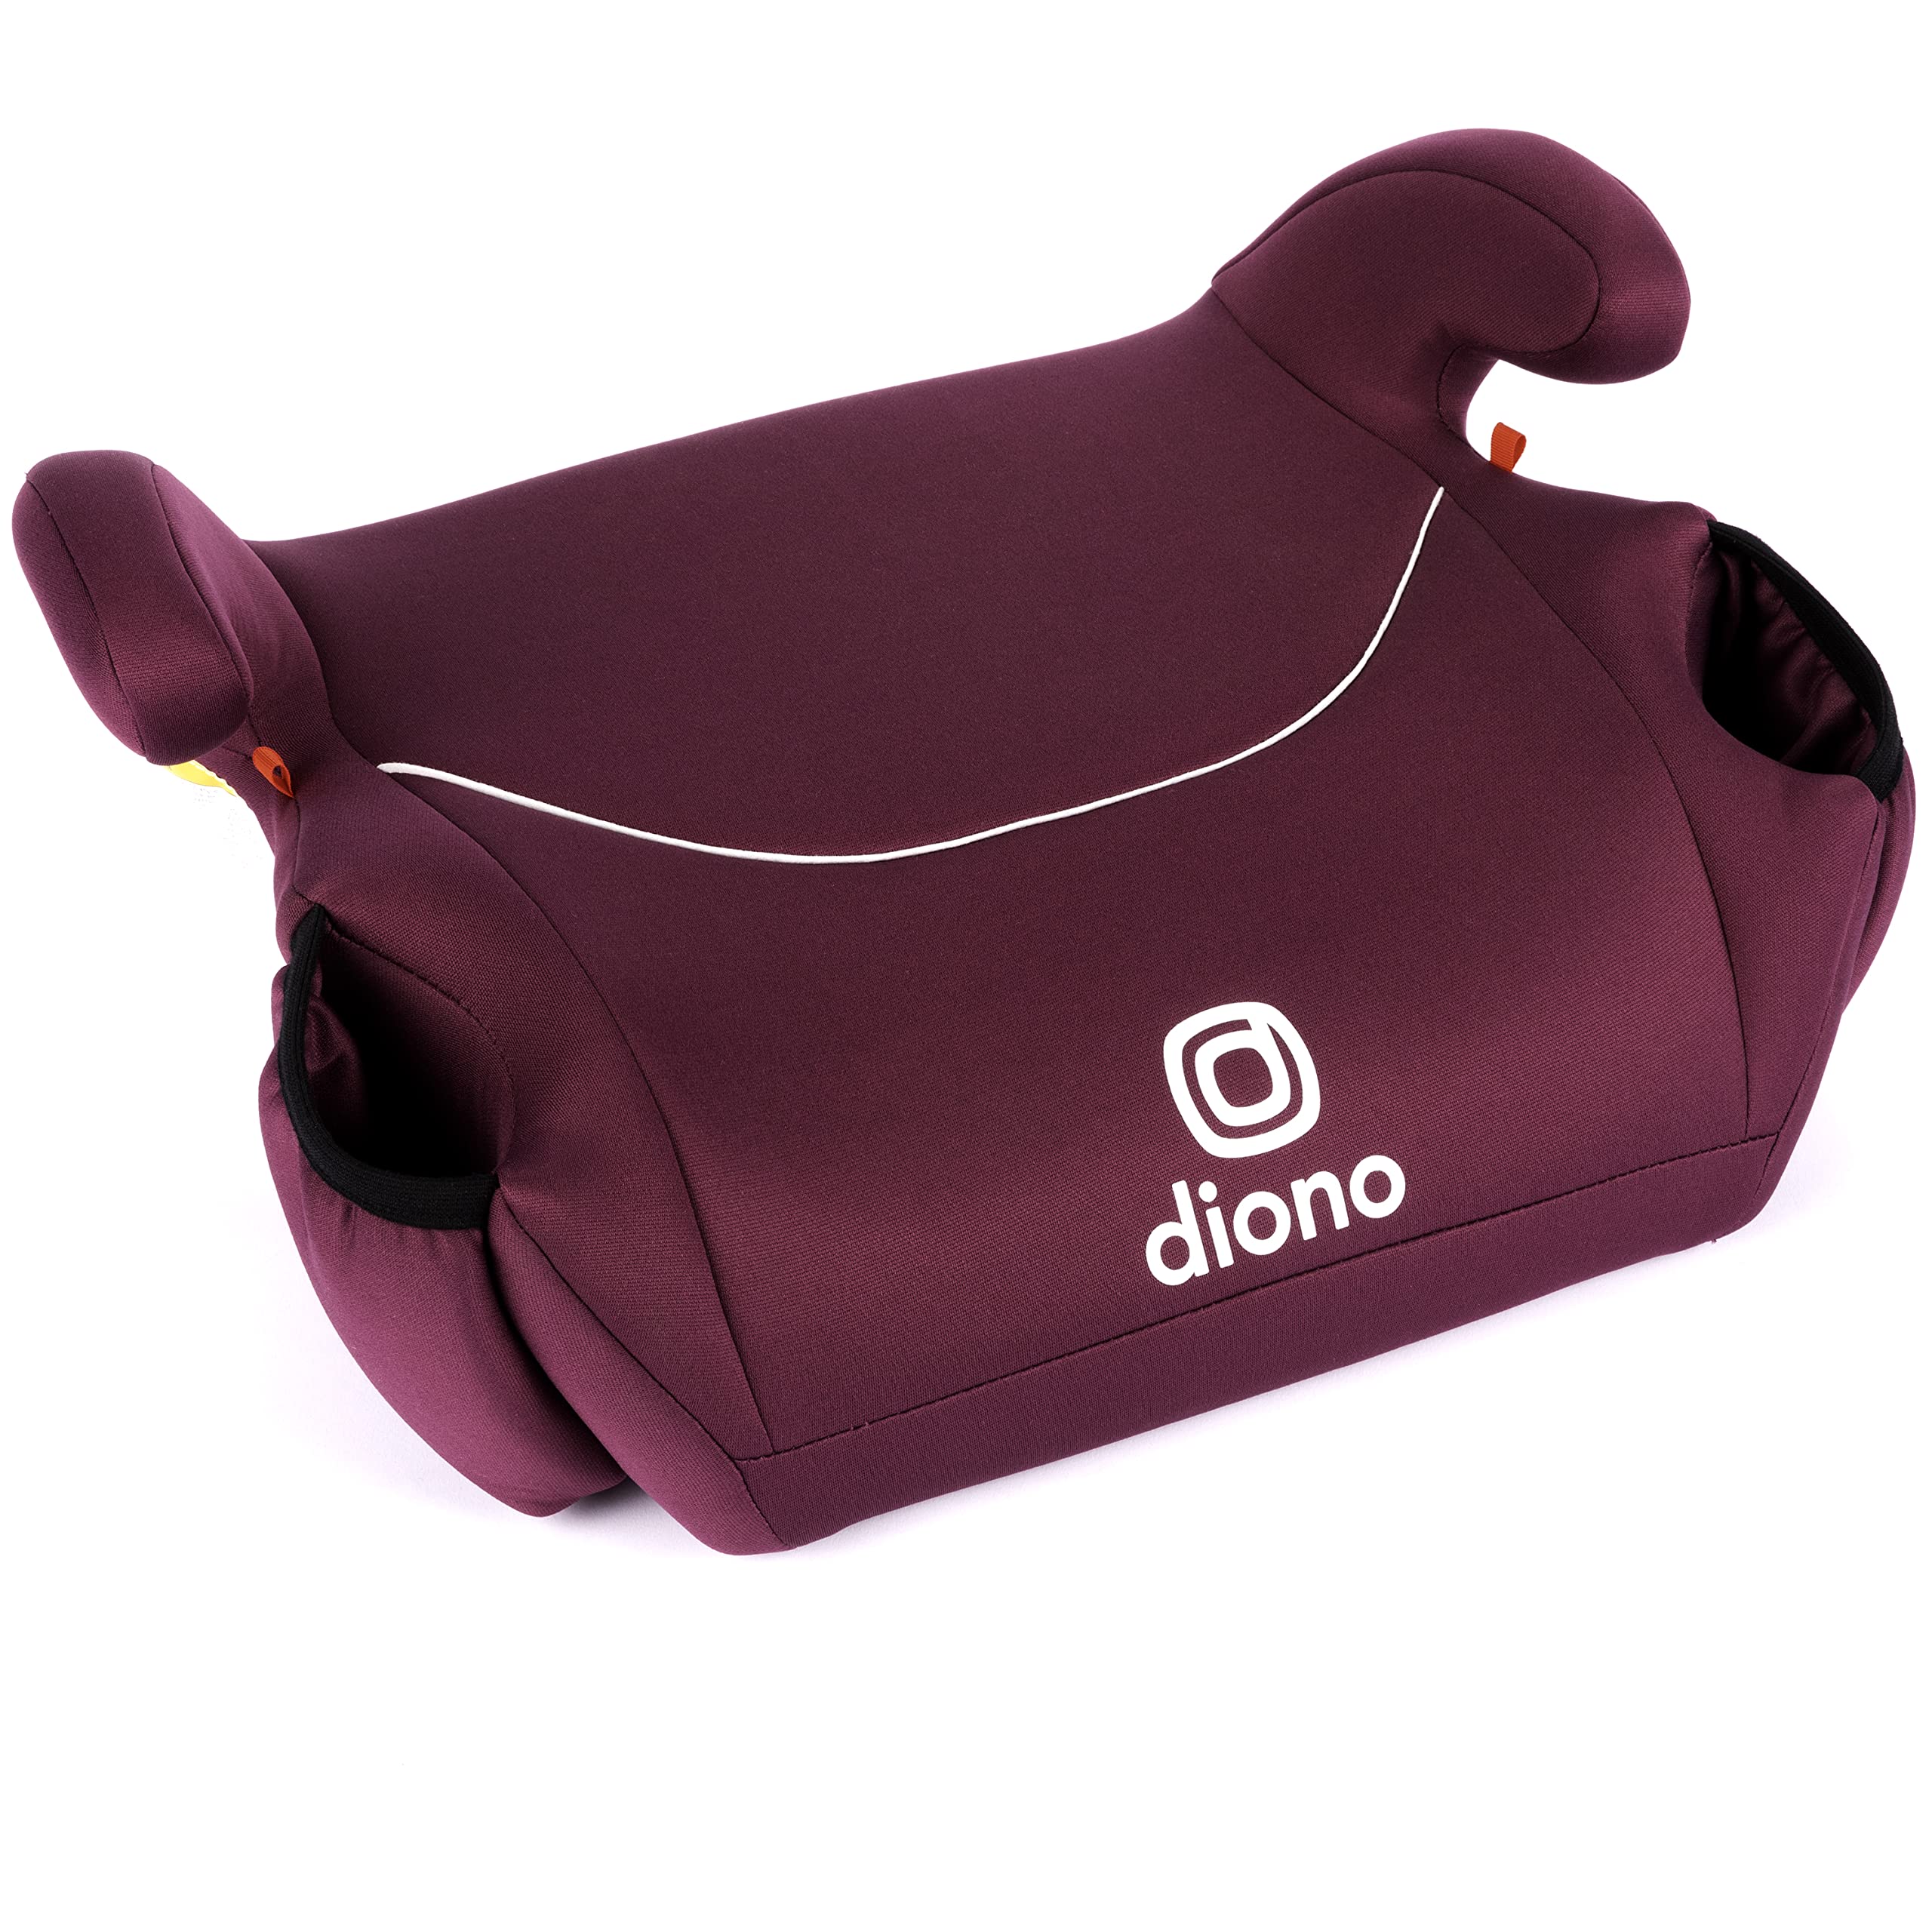 Diono Solana, No Latch, Single Backless Booster Car Seat, Lightweight, Machine Washable Covers, Cup Holders, Pink